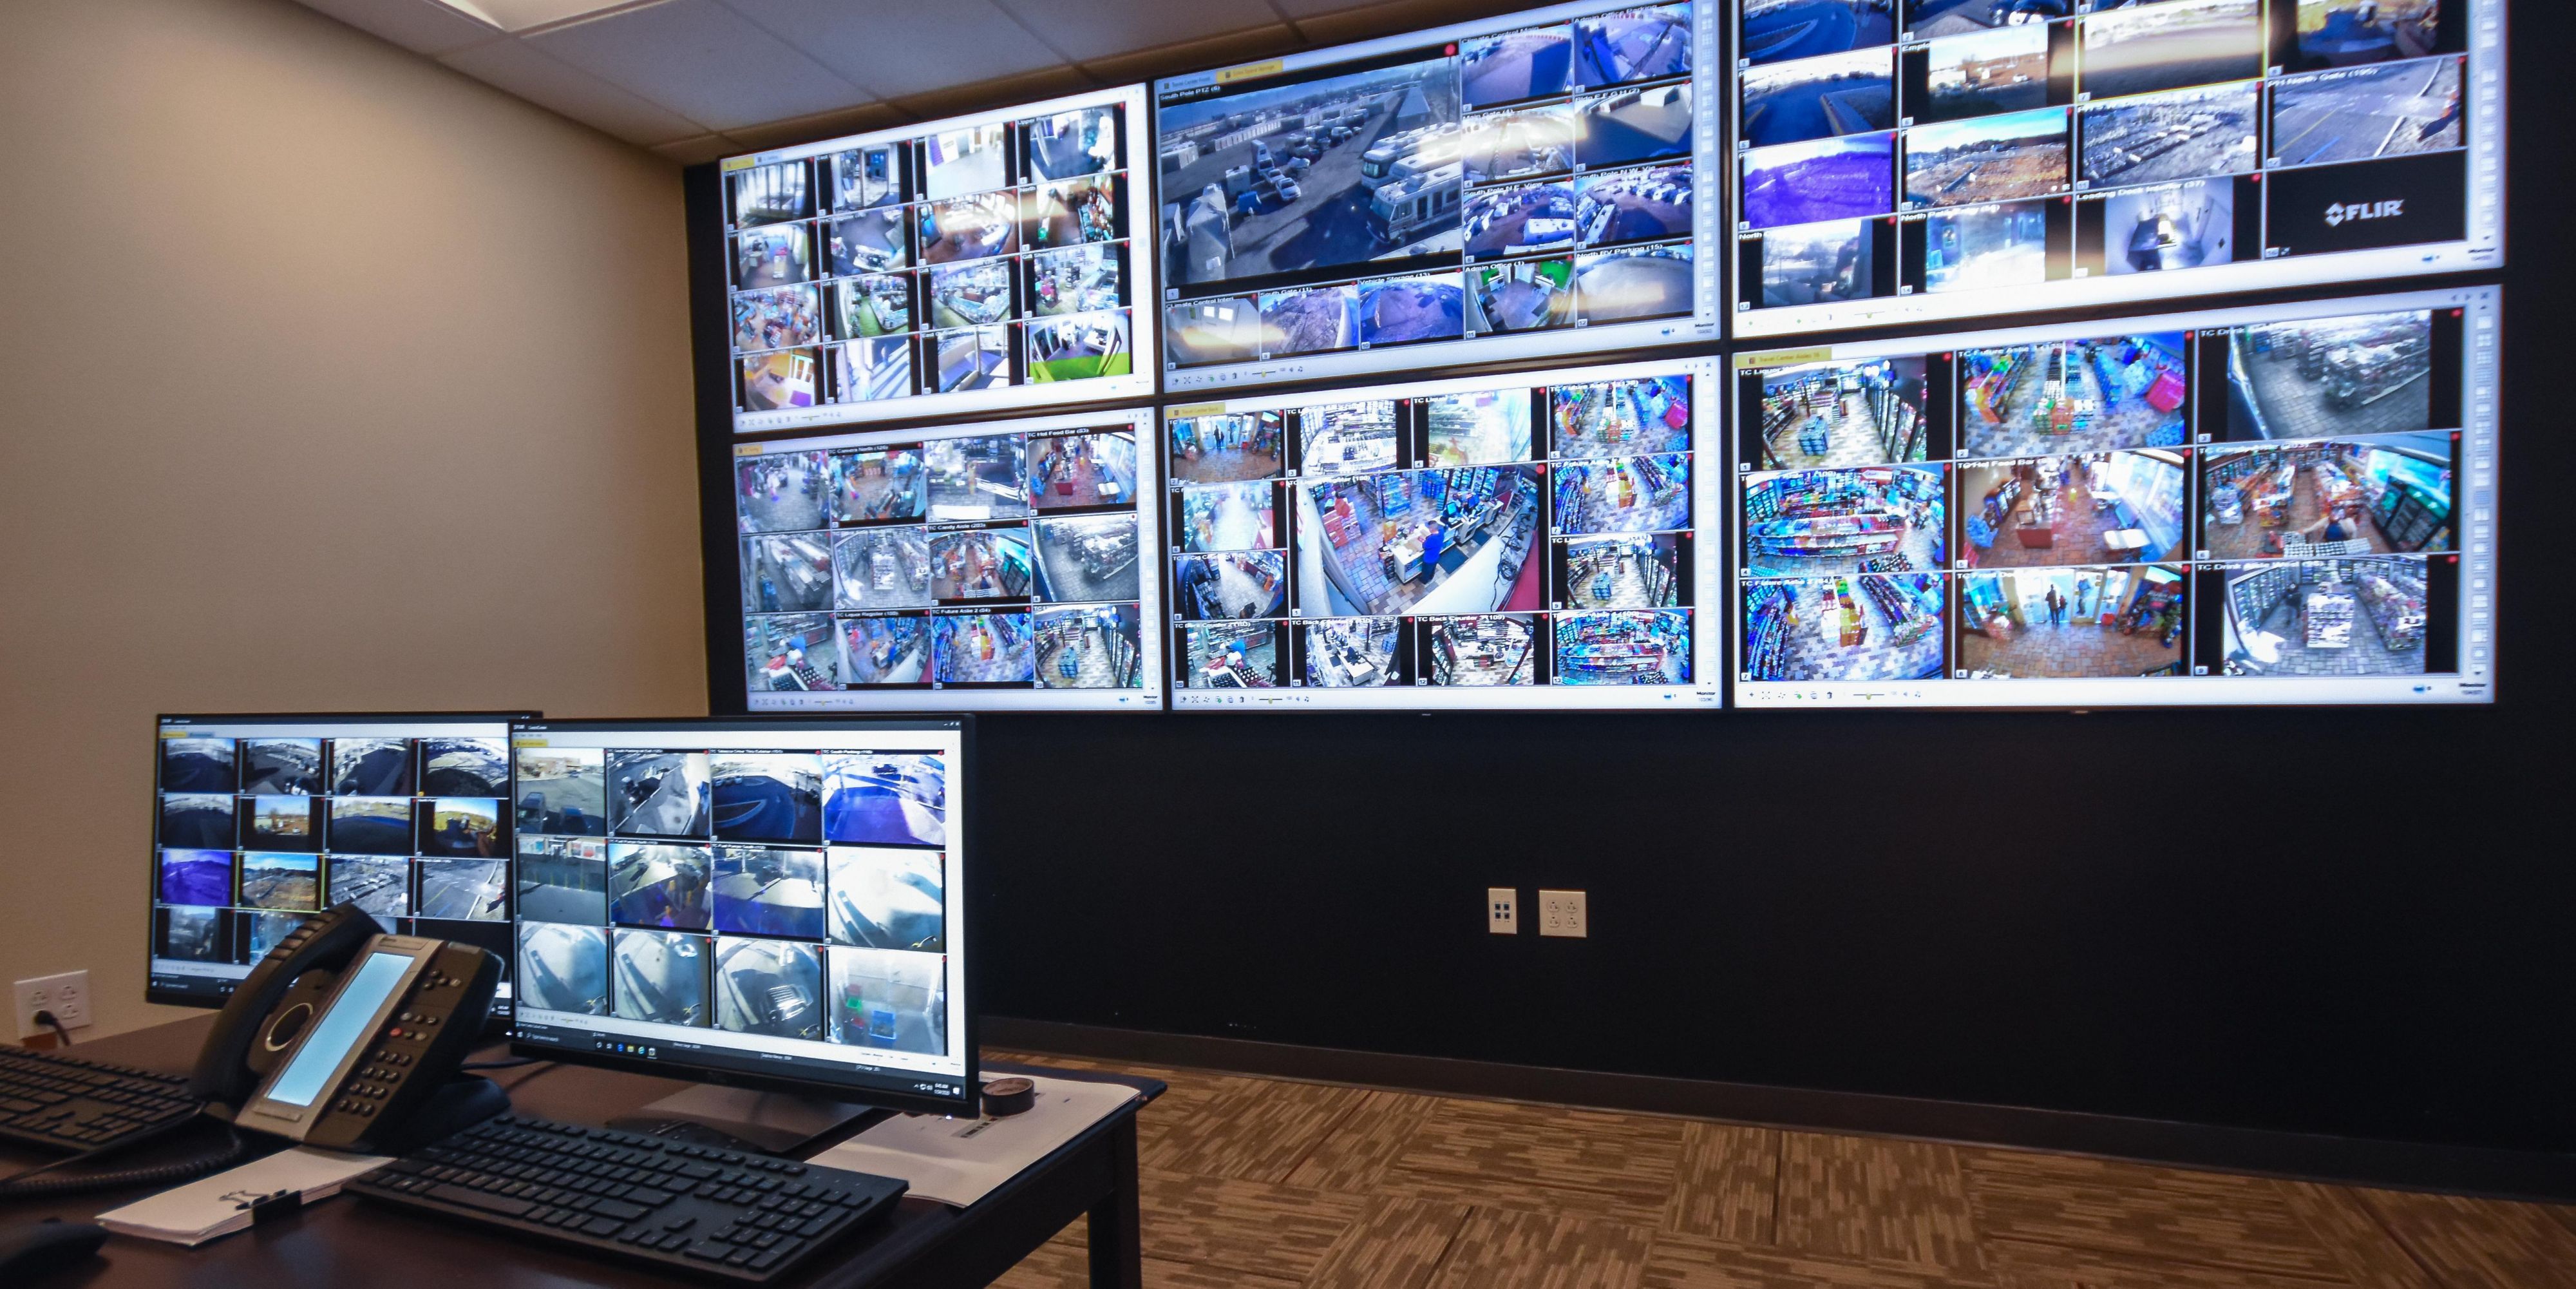 In addition to our live professional security patrols, the new 24/7 security command center is equipped with a powerful video surveillance system and is located adjacent to the hotel and park area in the center of the nearly 80-acre Campus. It ensures public safety throughout the vast cultural, entertainment and office complex.